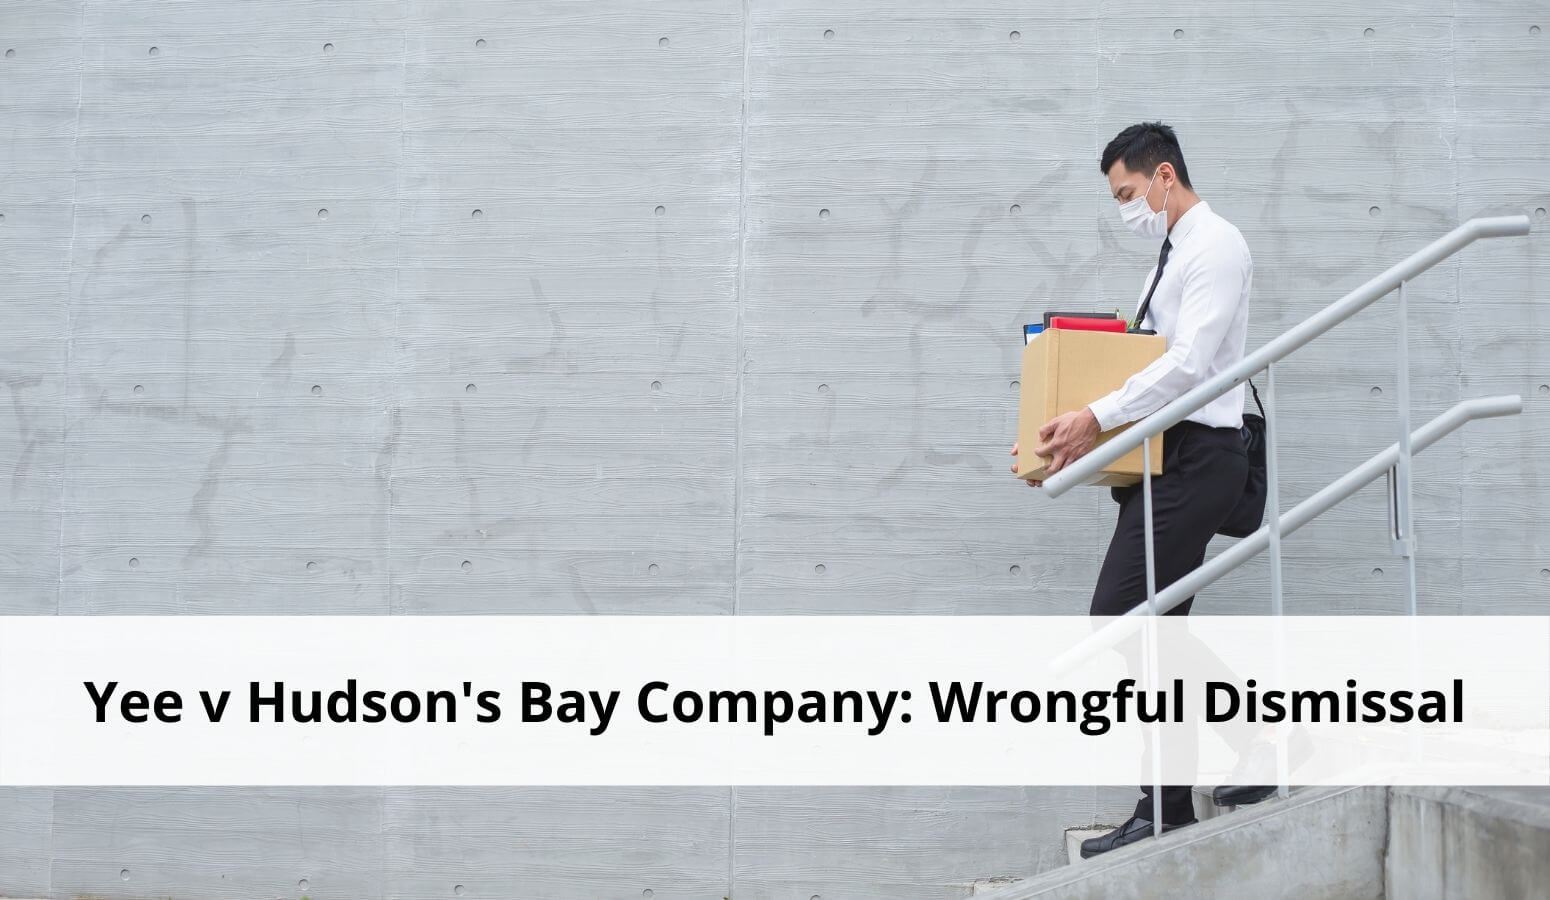 Featured image for “Yee v Hudson’s Bay Company, 2021 ONSC 387 – Wrongful Dismissal Claim”